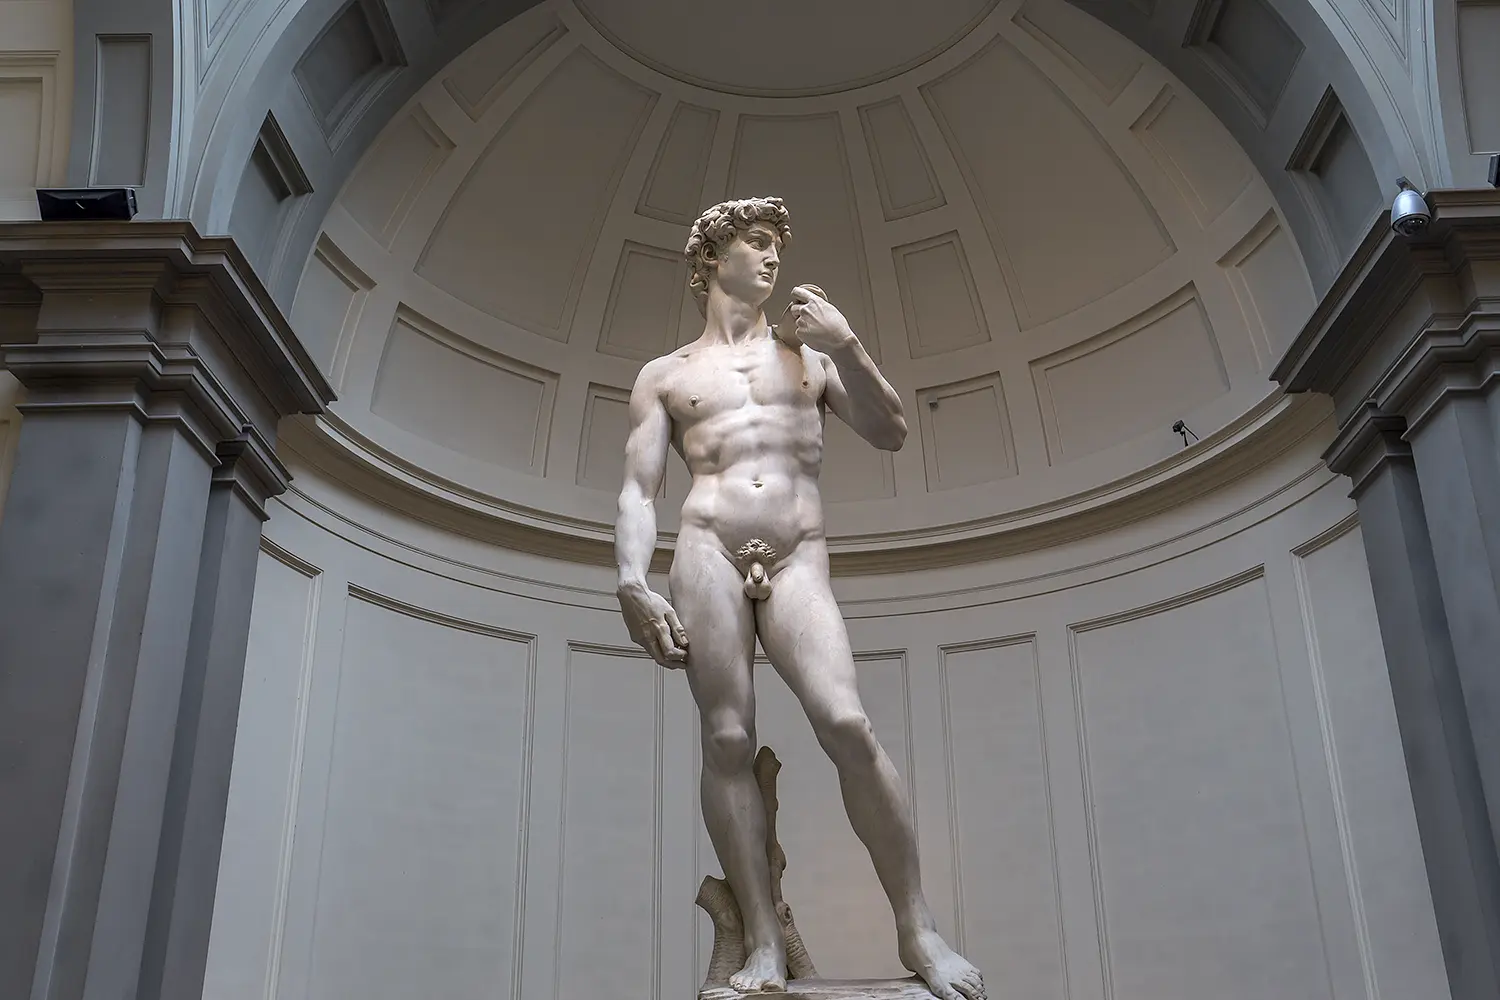 David by Michelangelo at the Galleria dell'Accademia in Florence, Italy